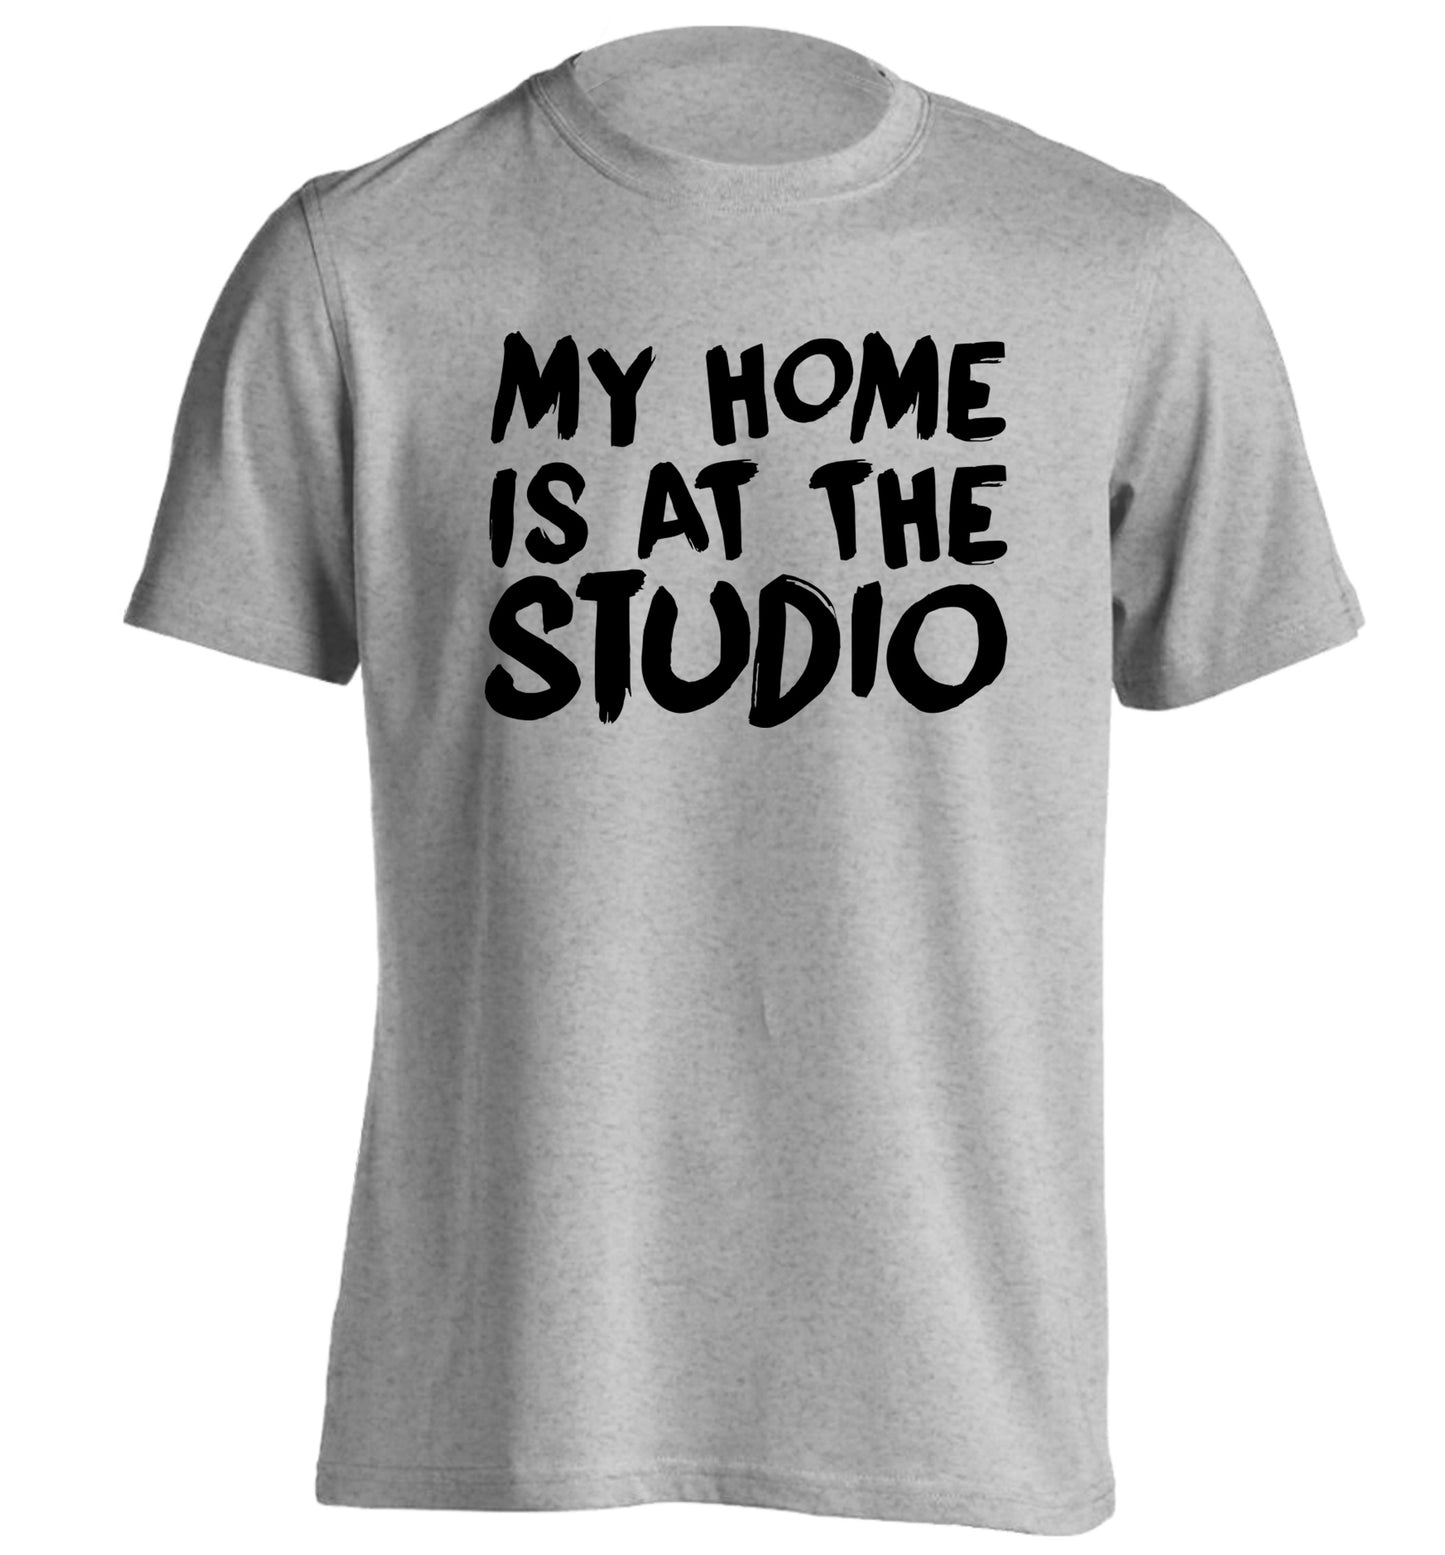 My home is at the studio adults unisex grey Tshirt 2XL